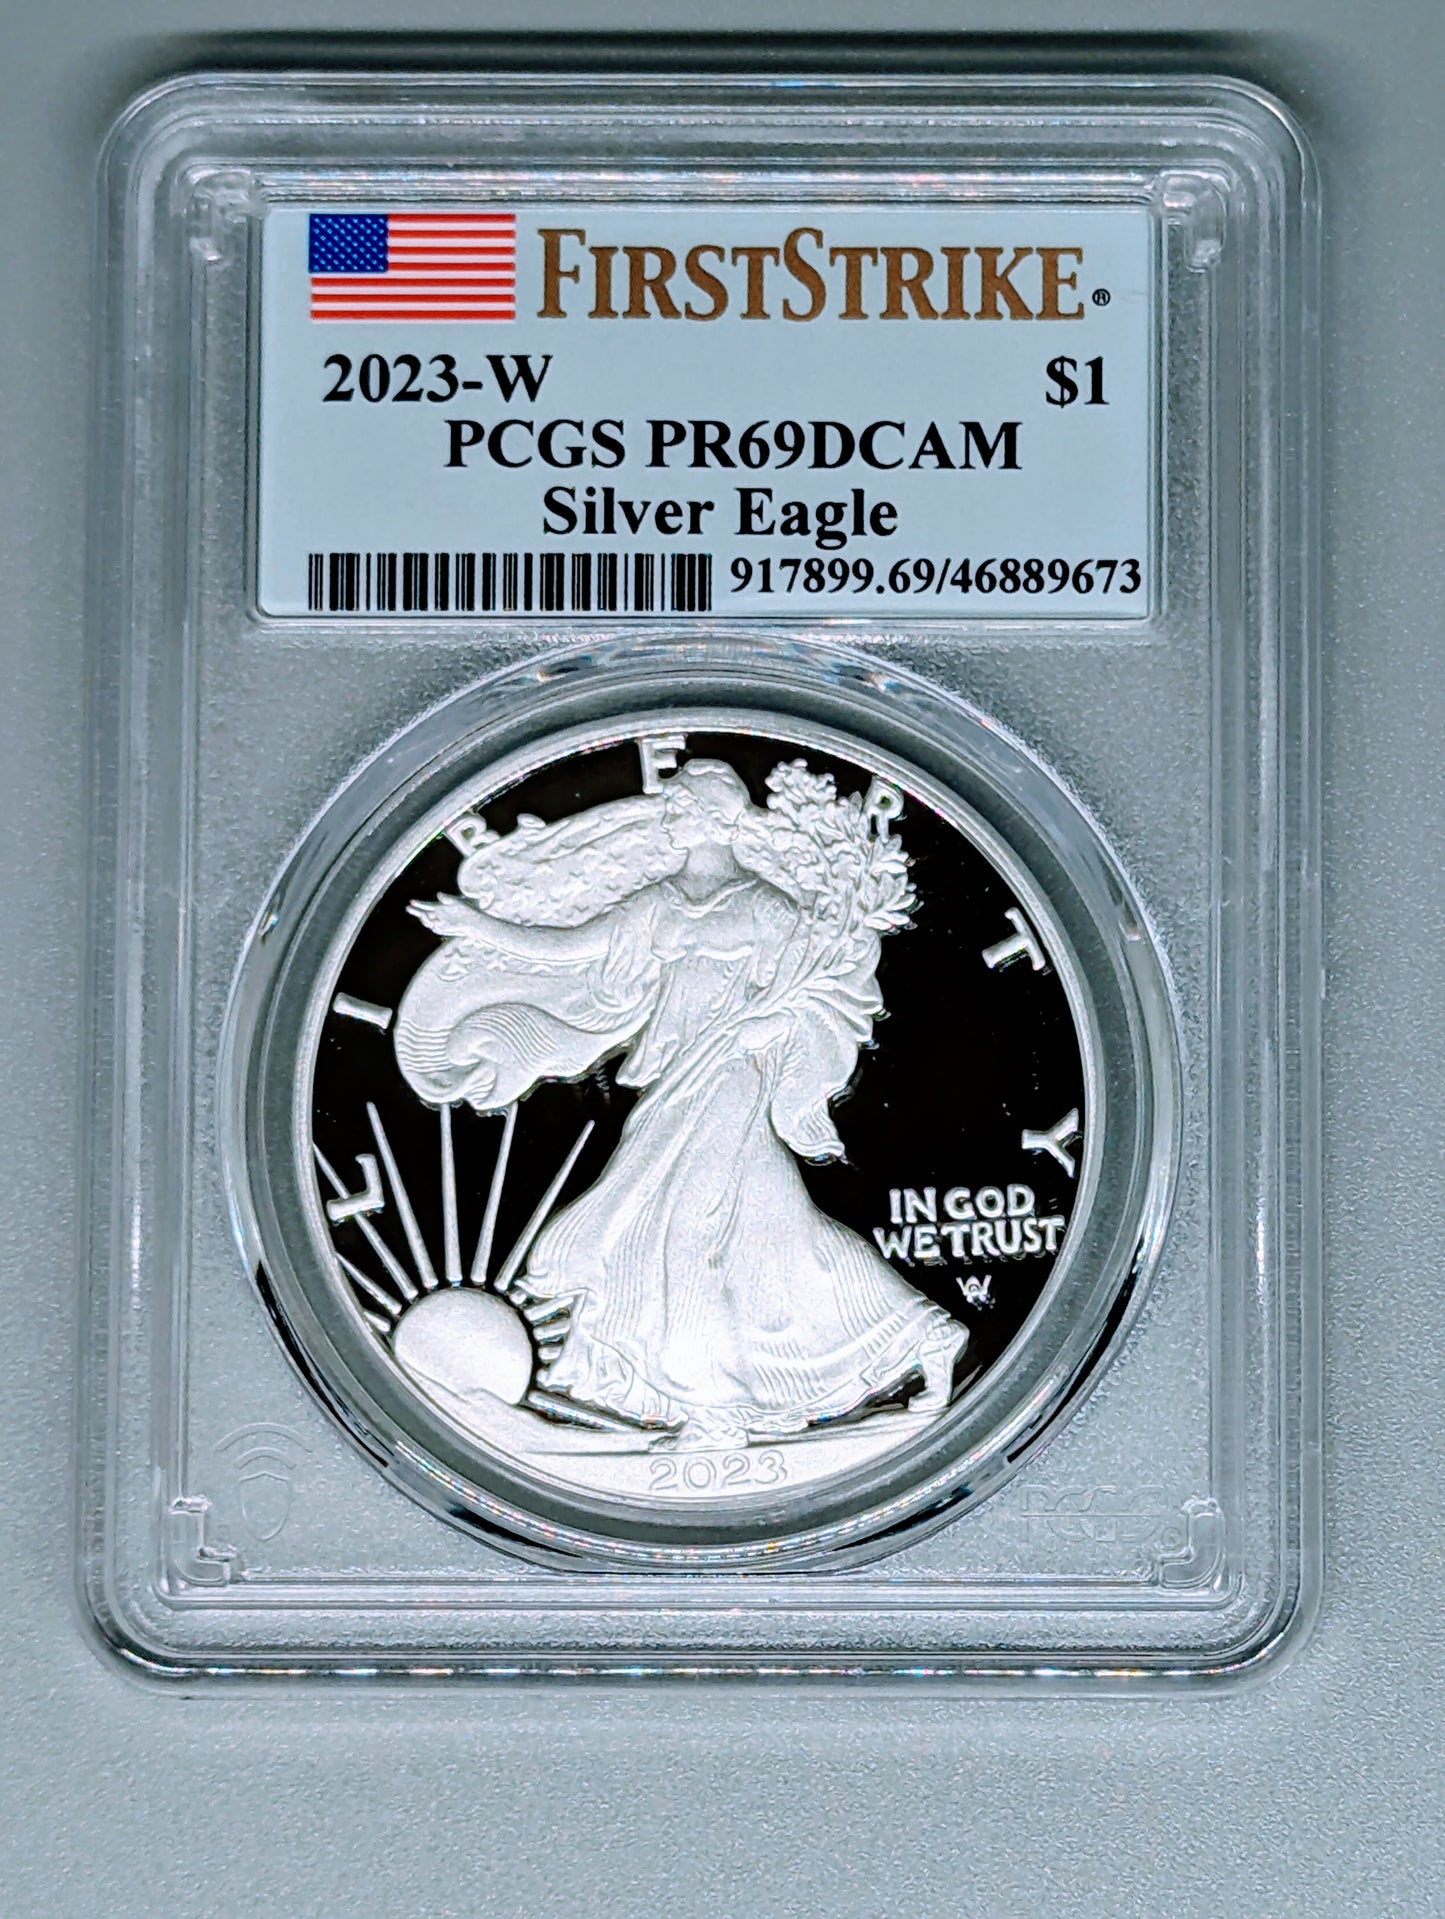 2023-W $1 American Eagle 1 oz. Silver Proof Coin - PCGS PR69DCAM - First Strike